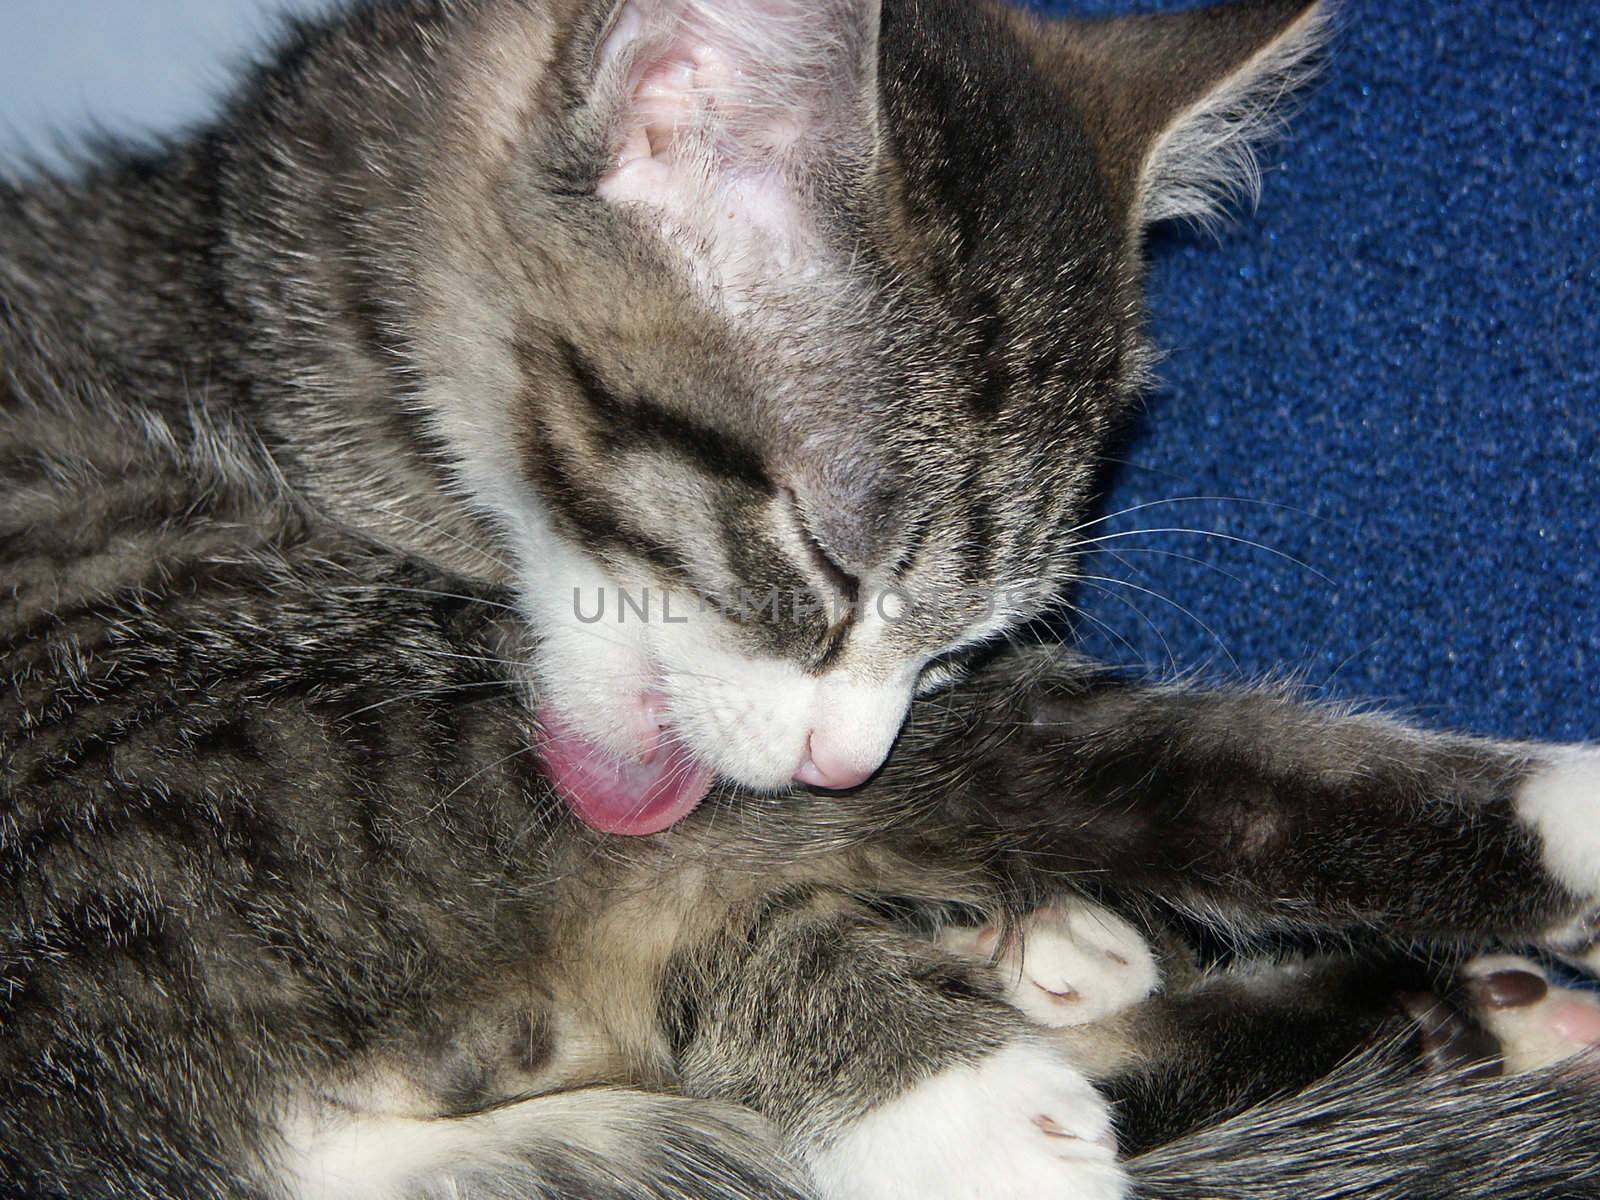 the Image of the cat licking by language